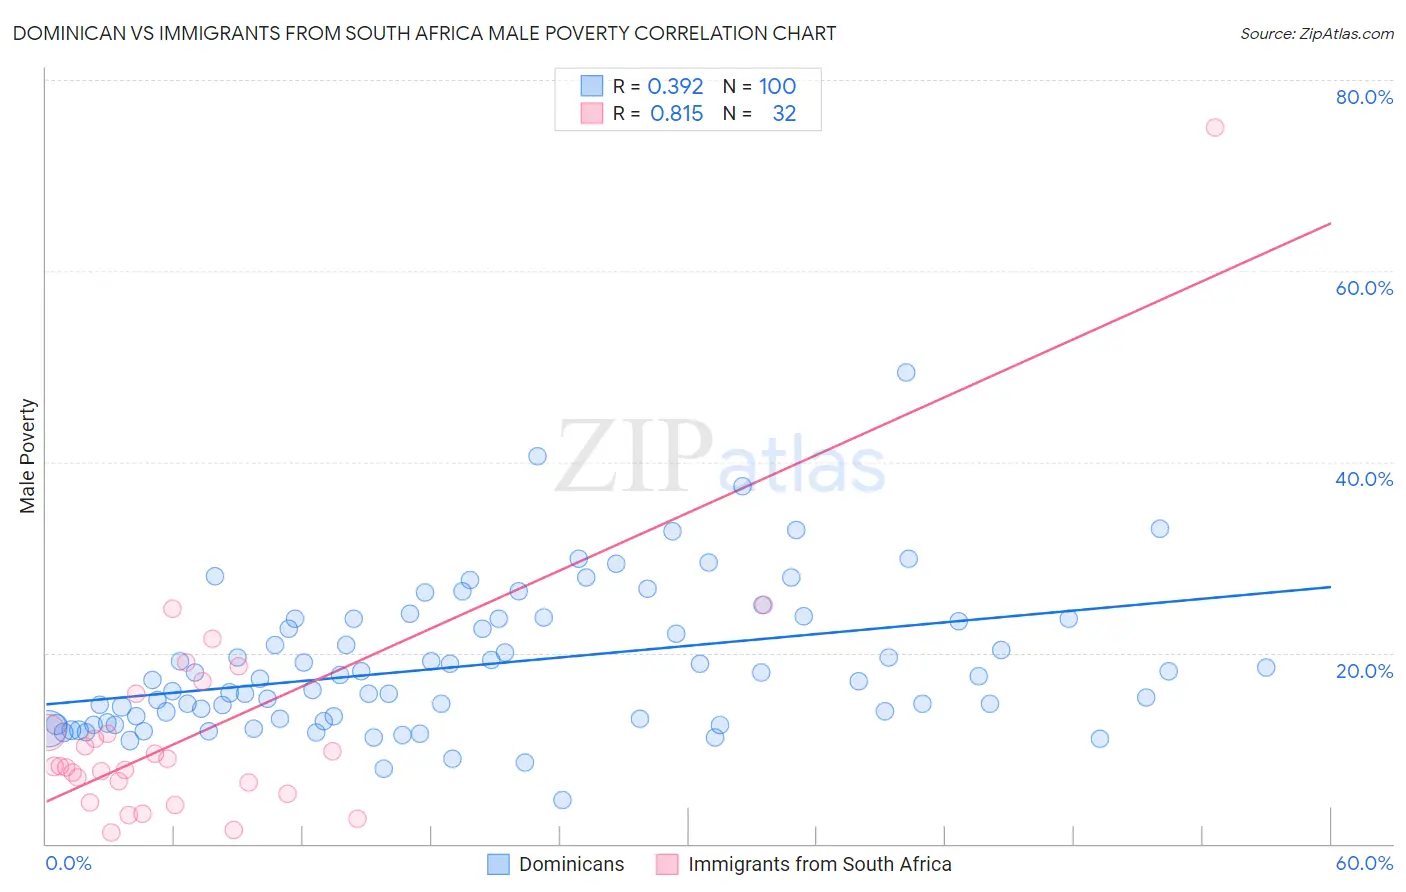 Dominican vs Immigrants from South Africa Male Poverty